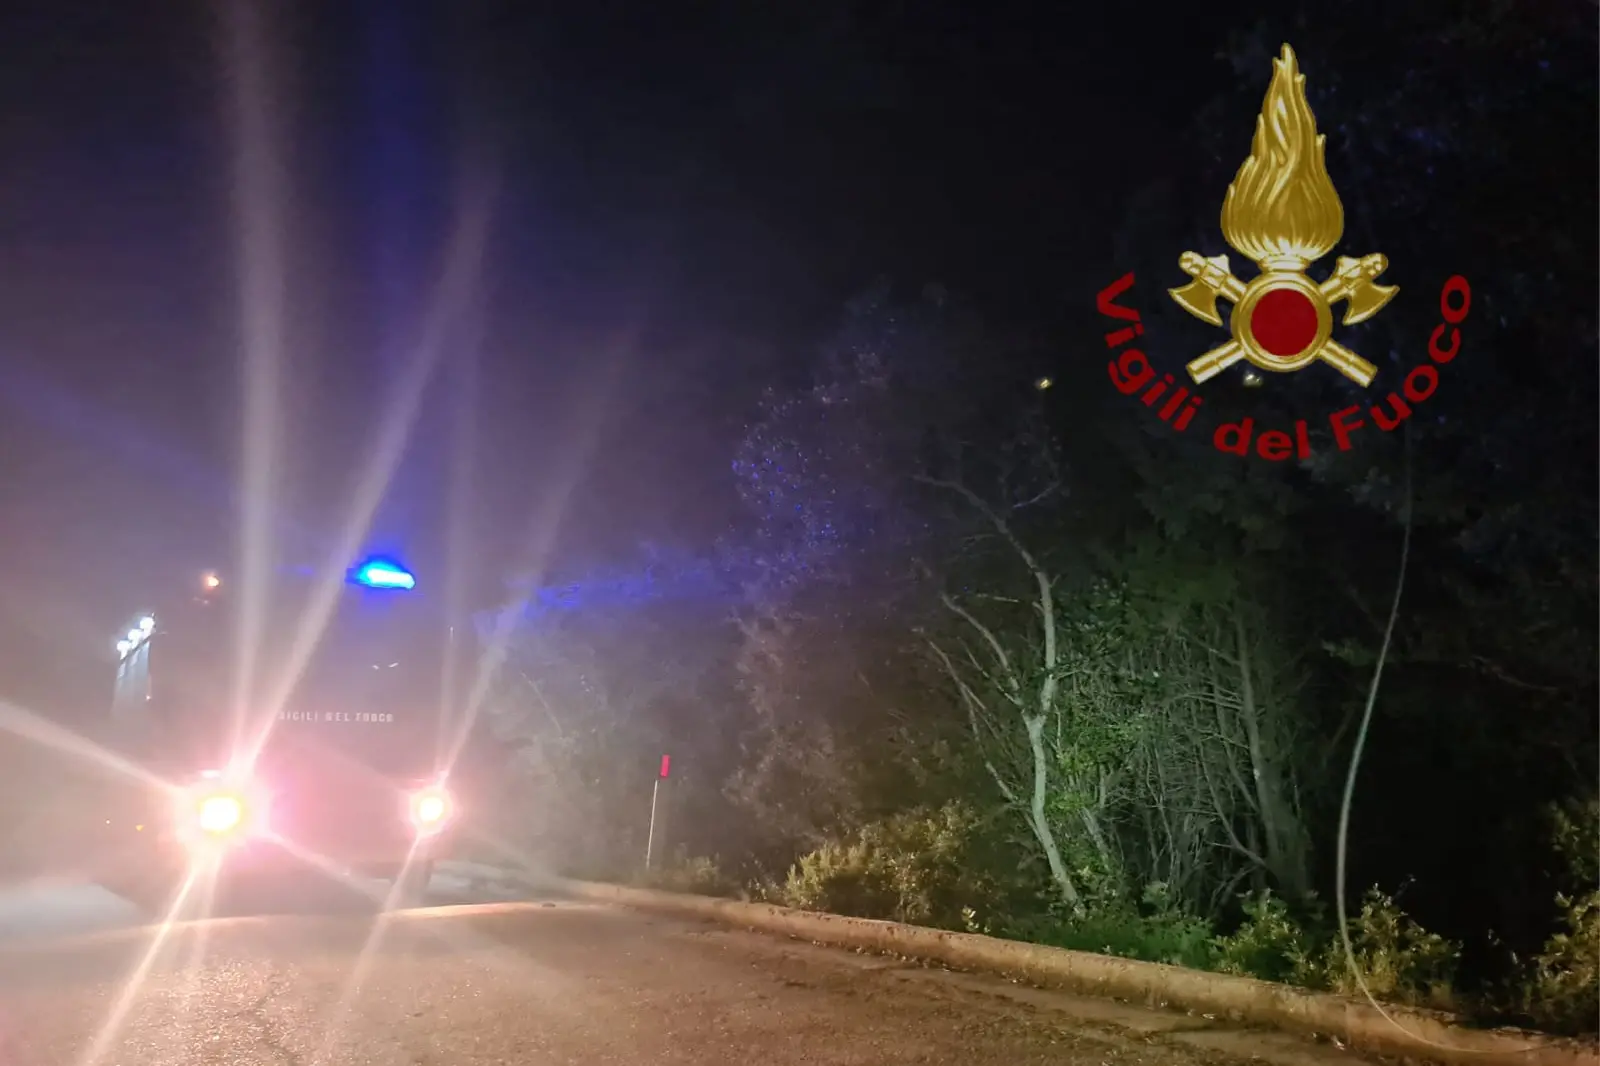 An intervention by the Sassari firefighters